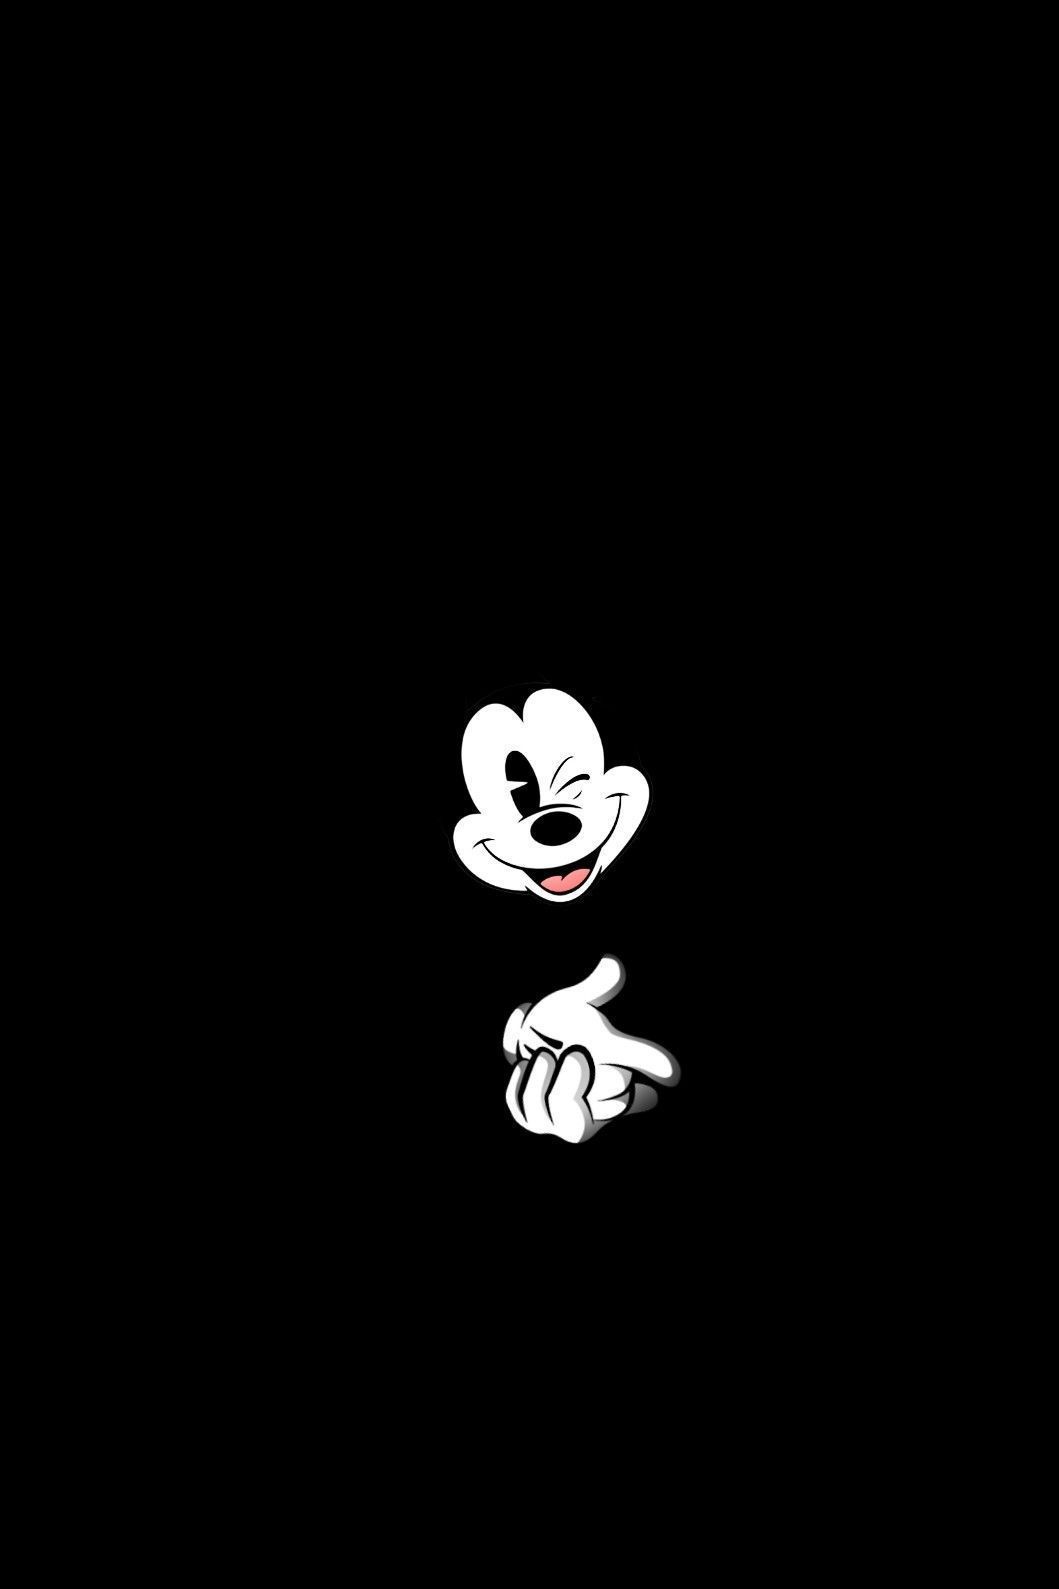 Mickey wallpaper Mickey Mouse Wallpaper iPhone, Cute Disney Wallpaper, Cute Cartoo. Mickey mouse wallpaper iphone, Mickey mouse wallpaper, Cute cartoon wallpaper